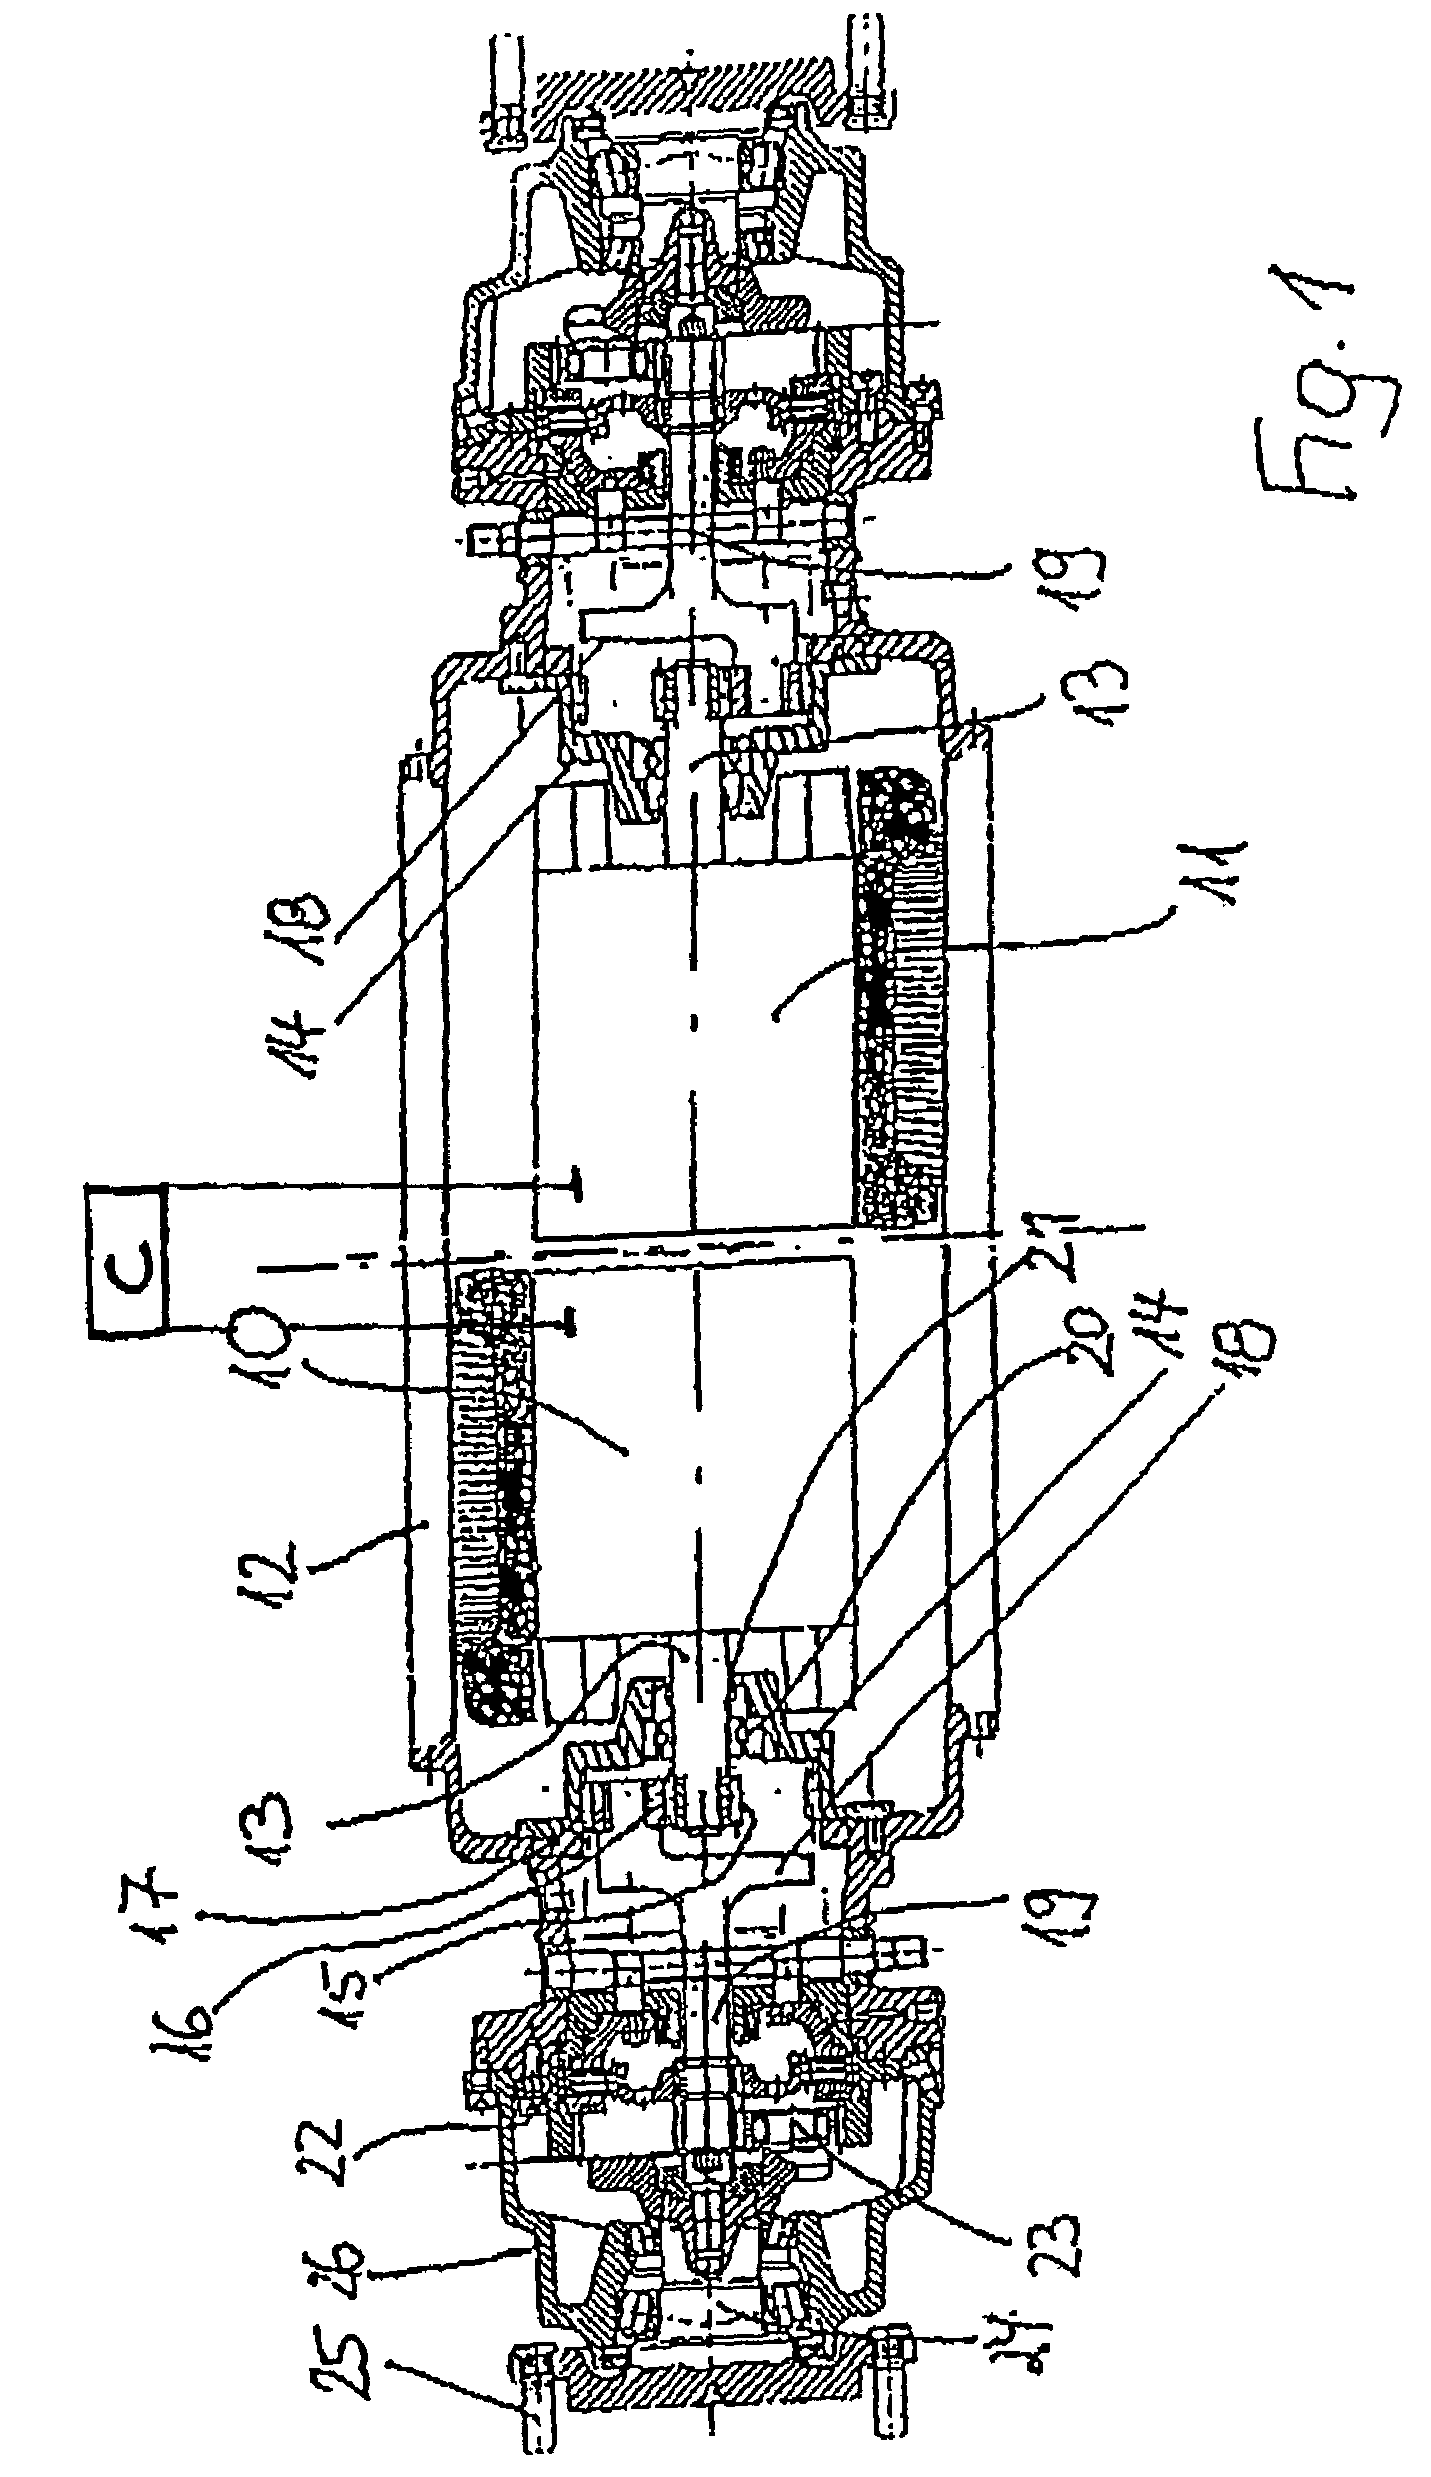 Directly driven driving axle having two drive motors